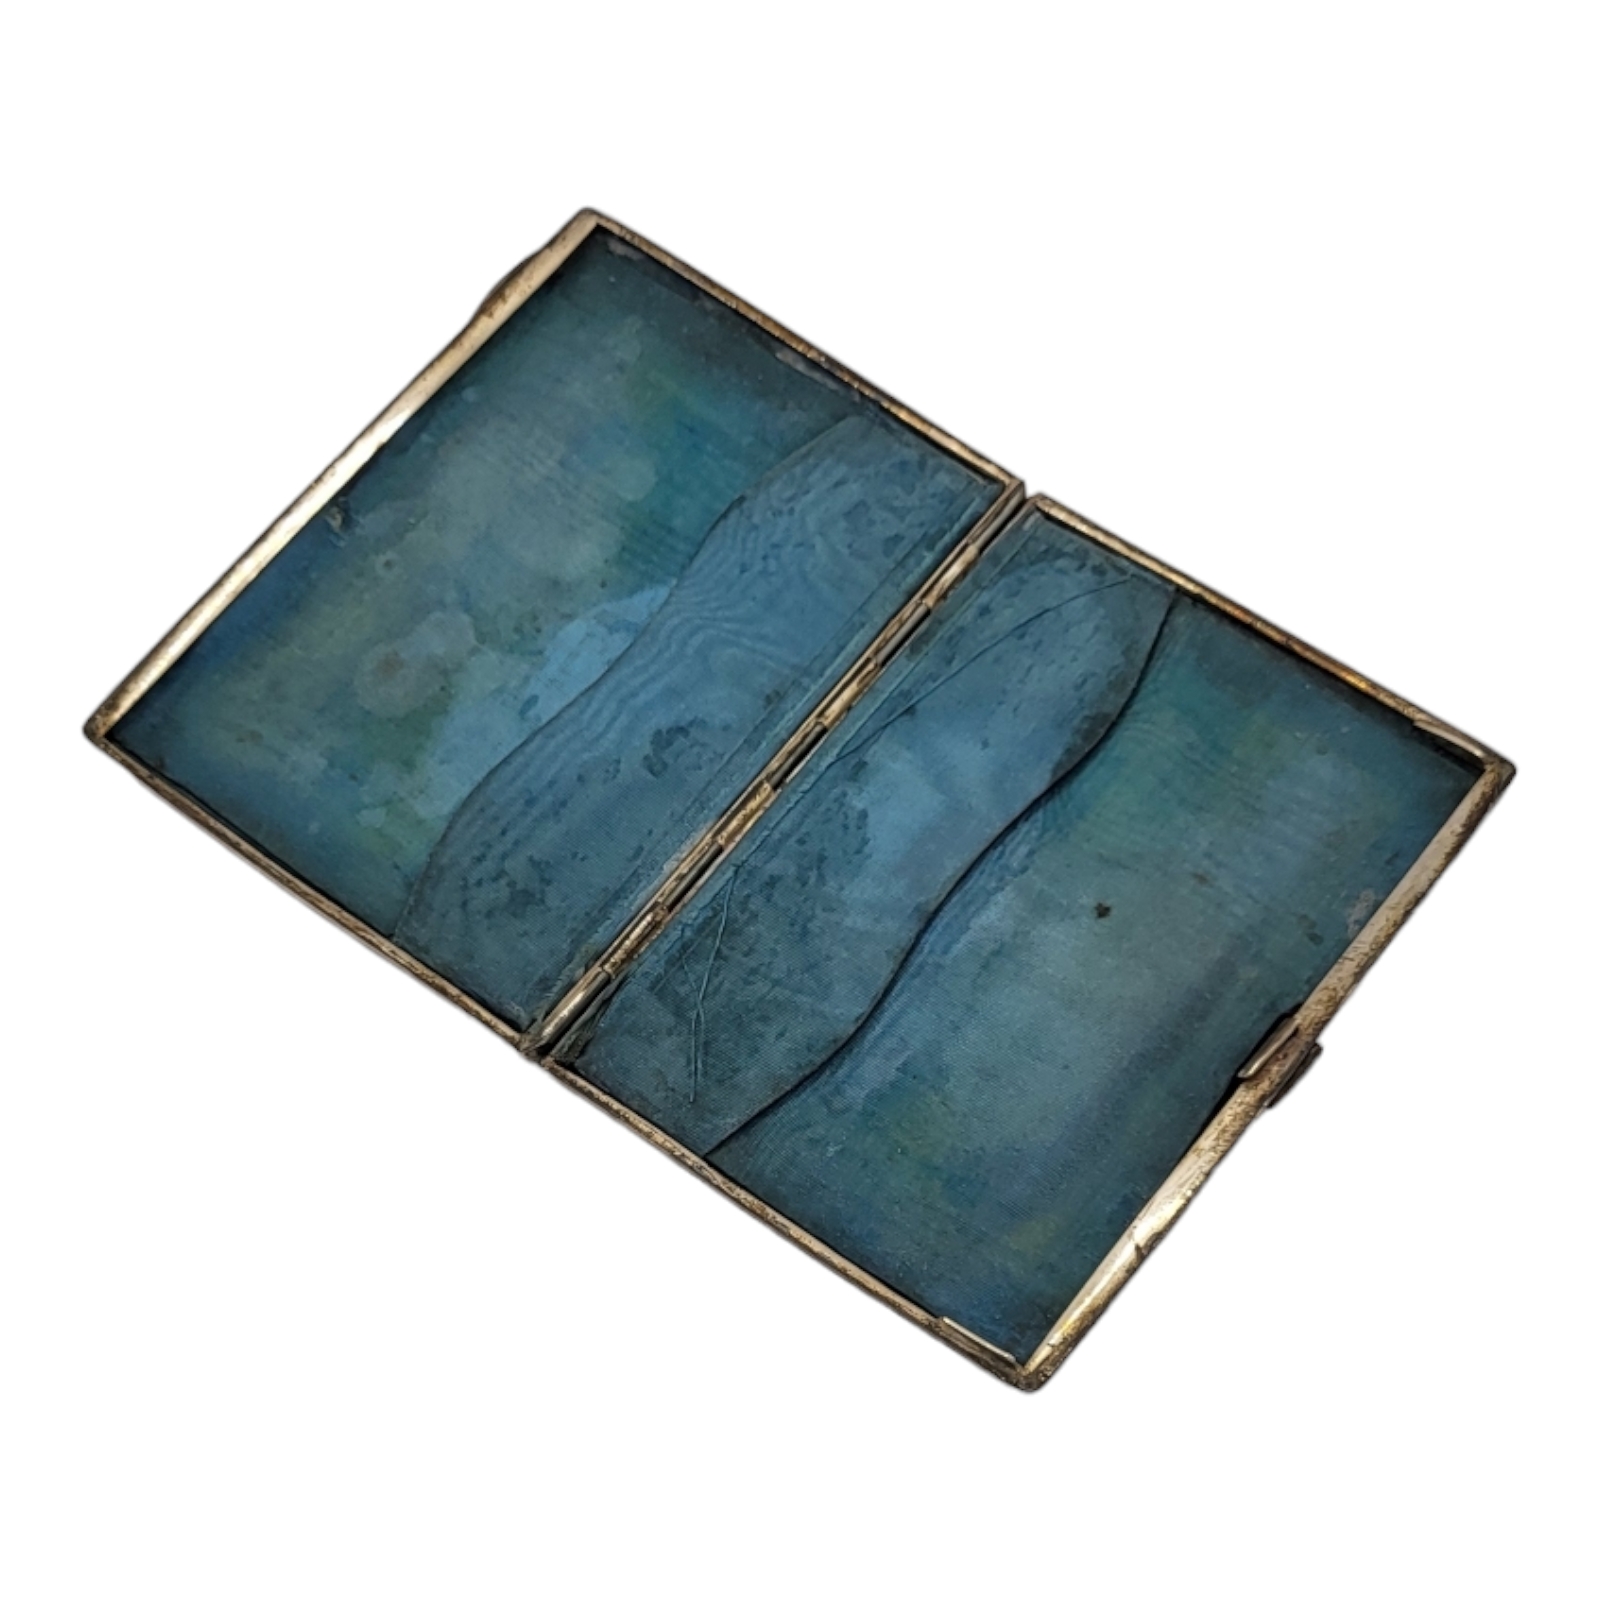 A VICTORIAN SILVER RECTANGULAR CARD CASE With engraved scrolled decoration and fitted silk interior, - Image 4 of 5